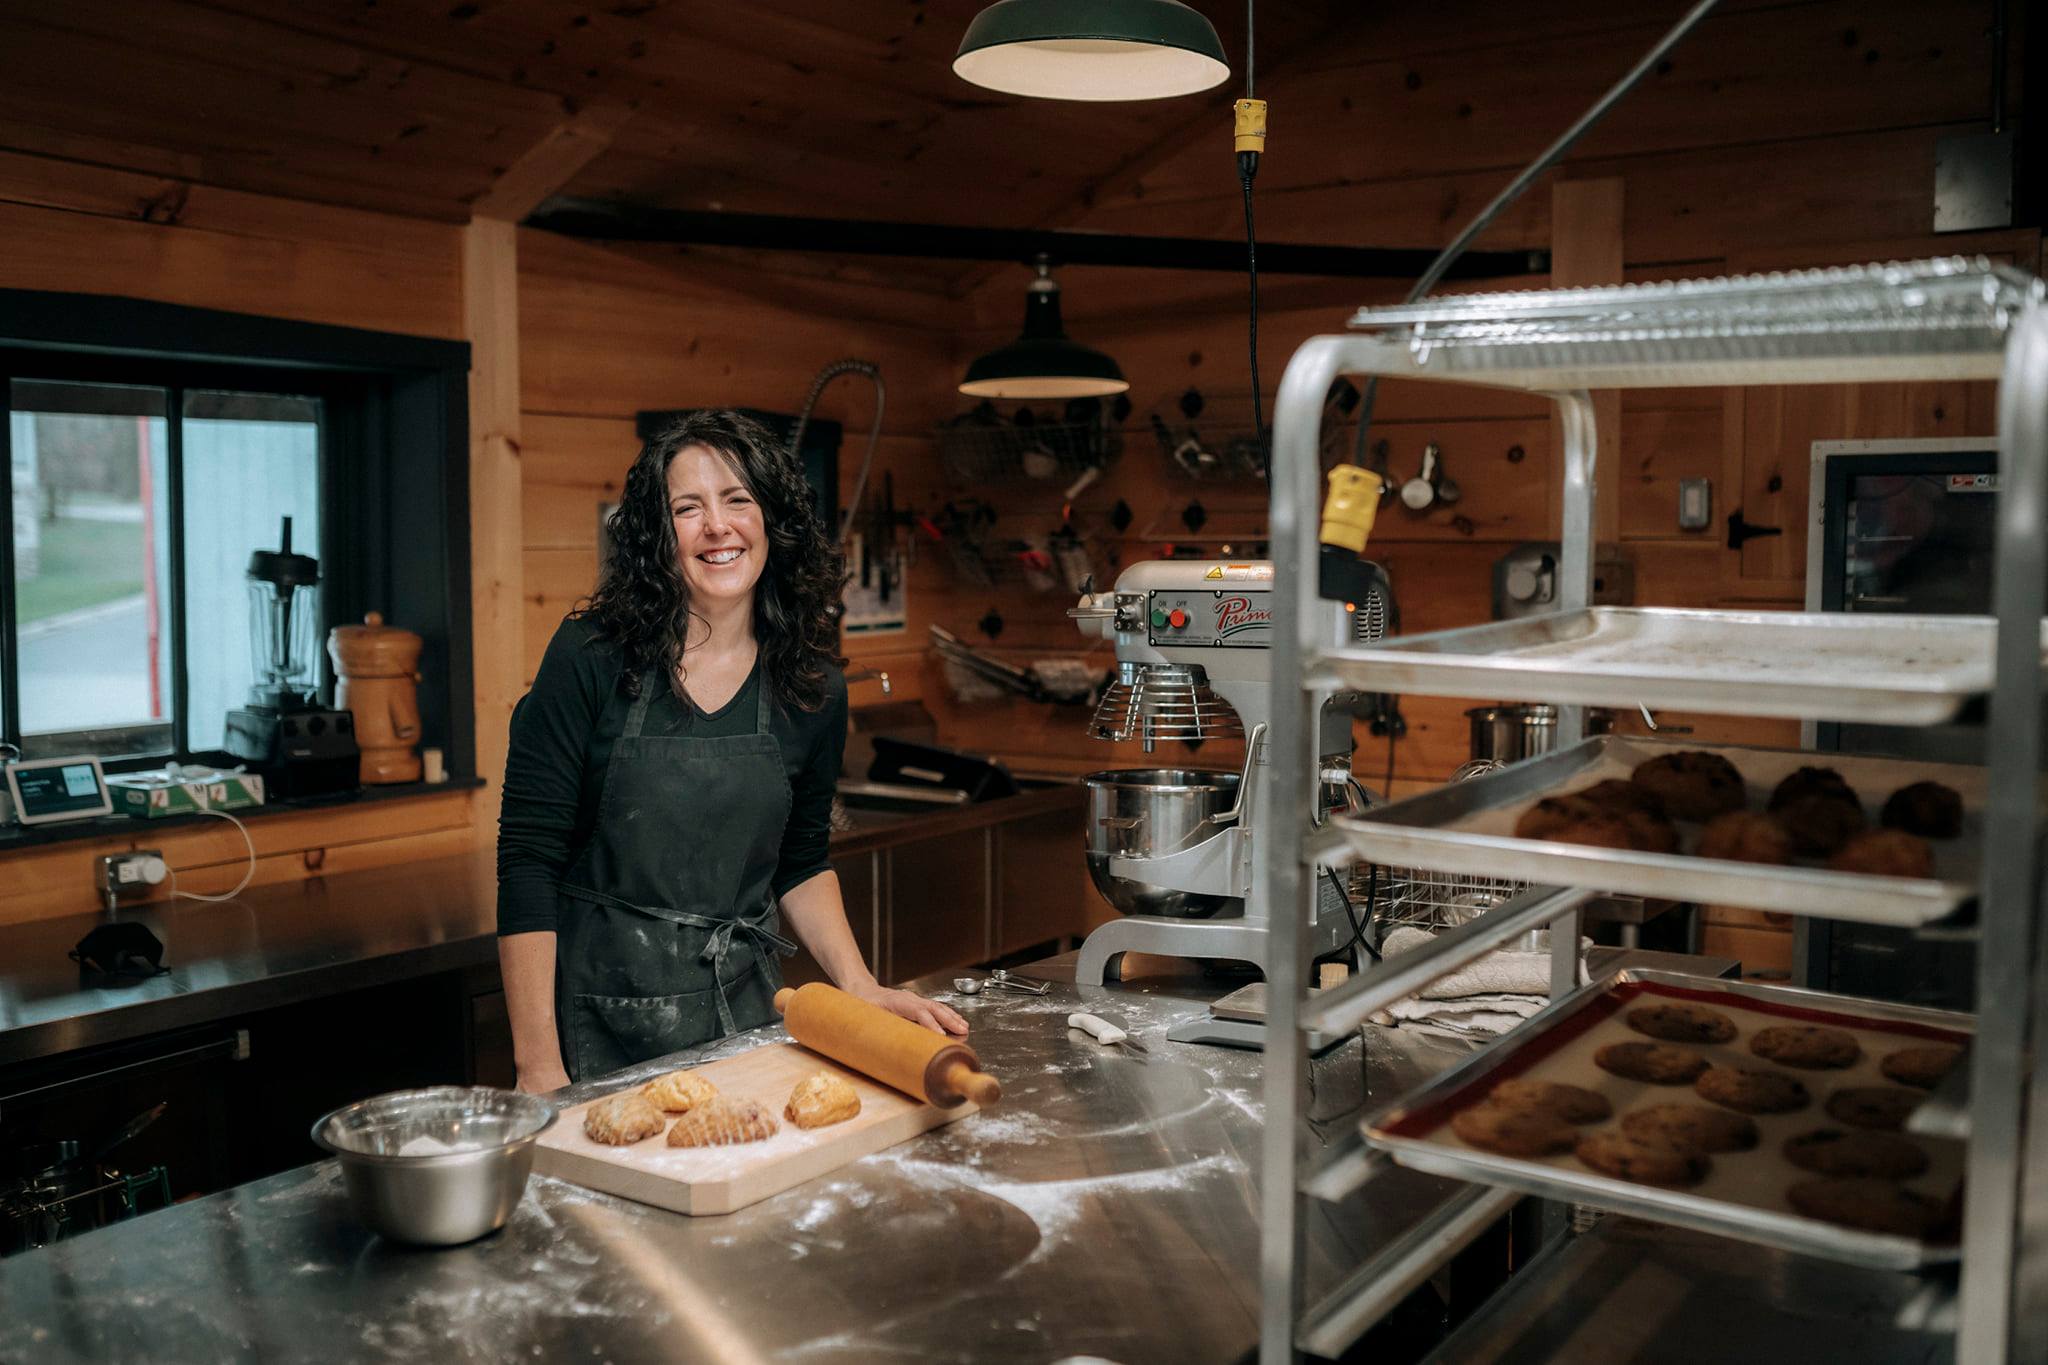 200 Years of Tradition Baked Into Every Bite - Arva Mill House Bakery